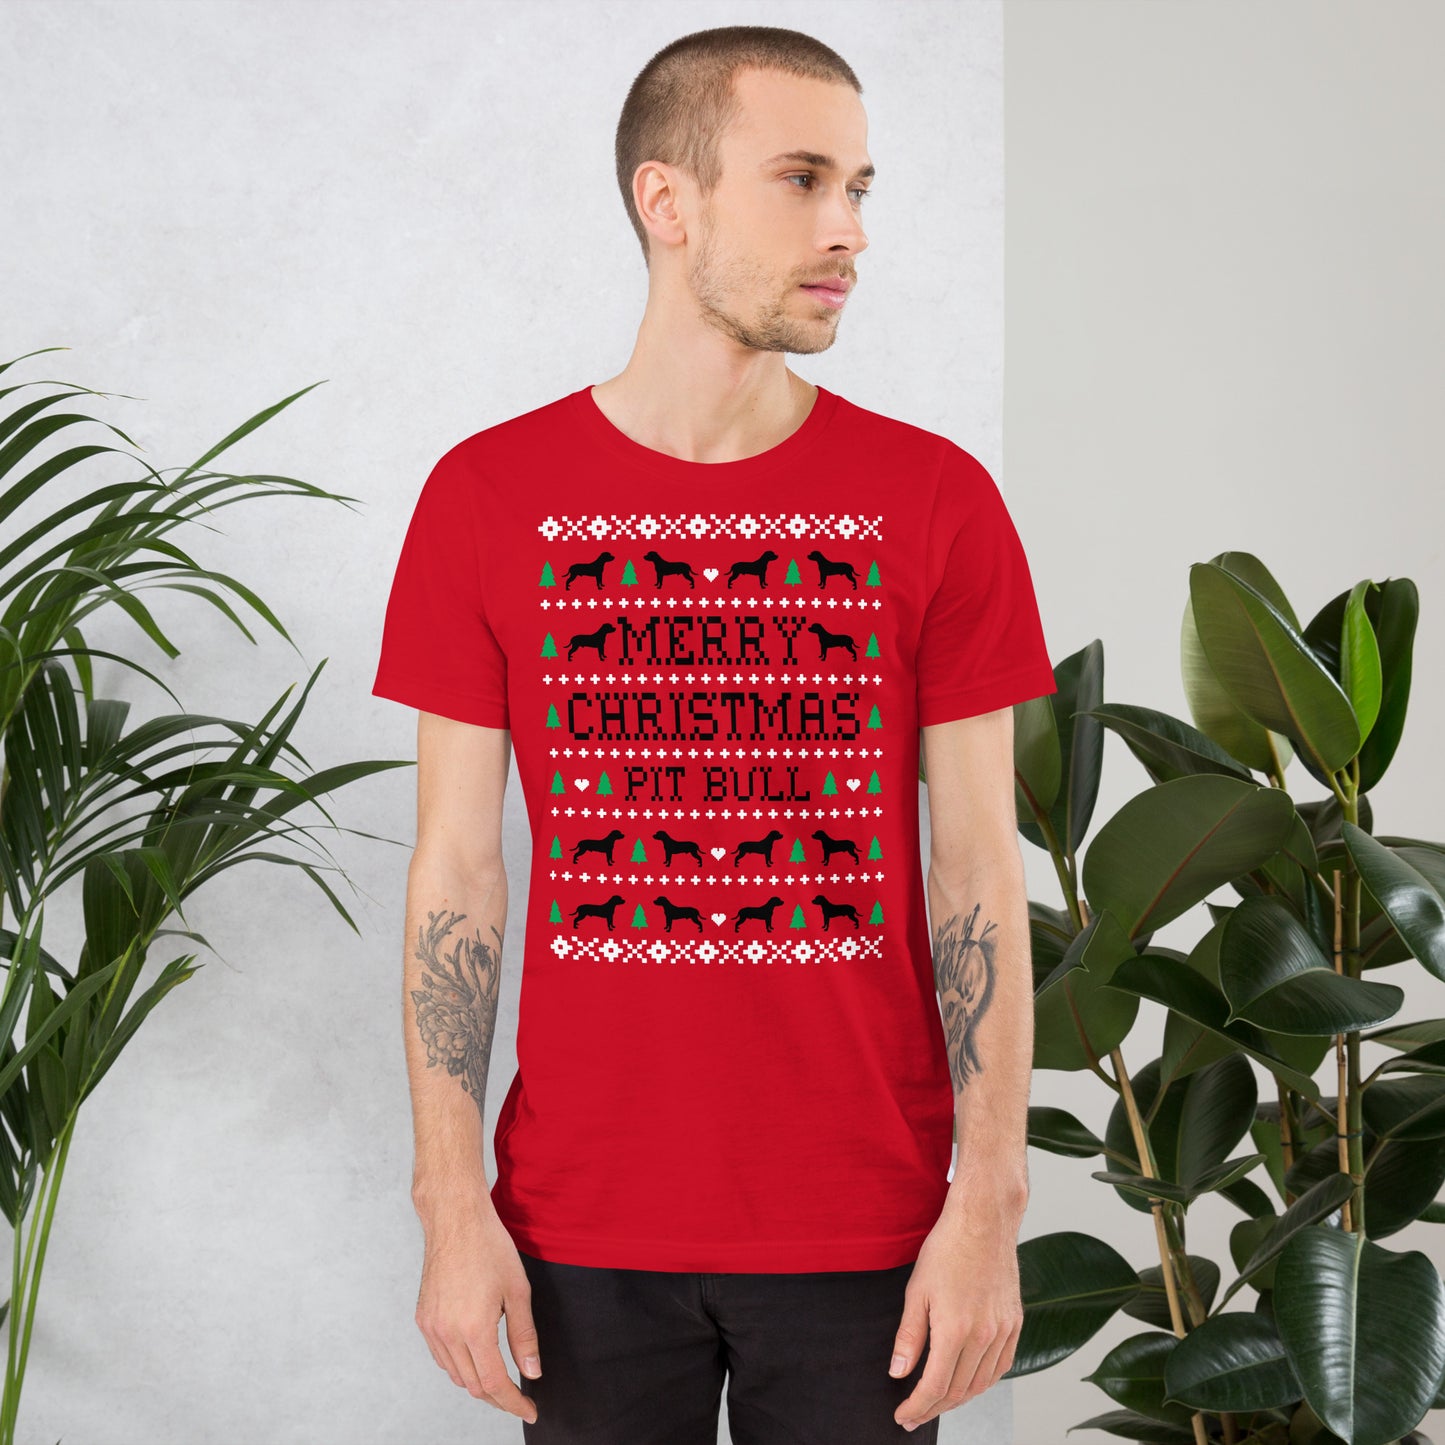 Pit Bull ugly Christmas unisex t-shirt red by Dog Artistry.